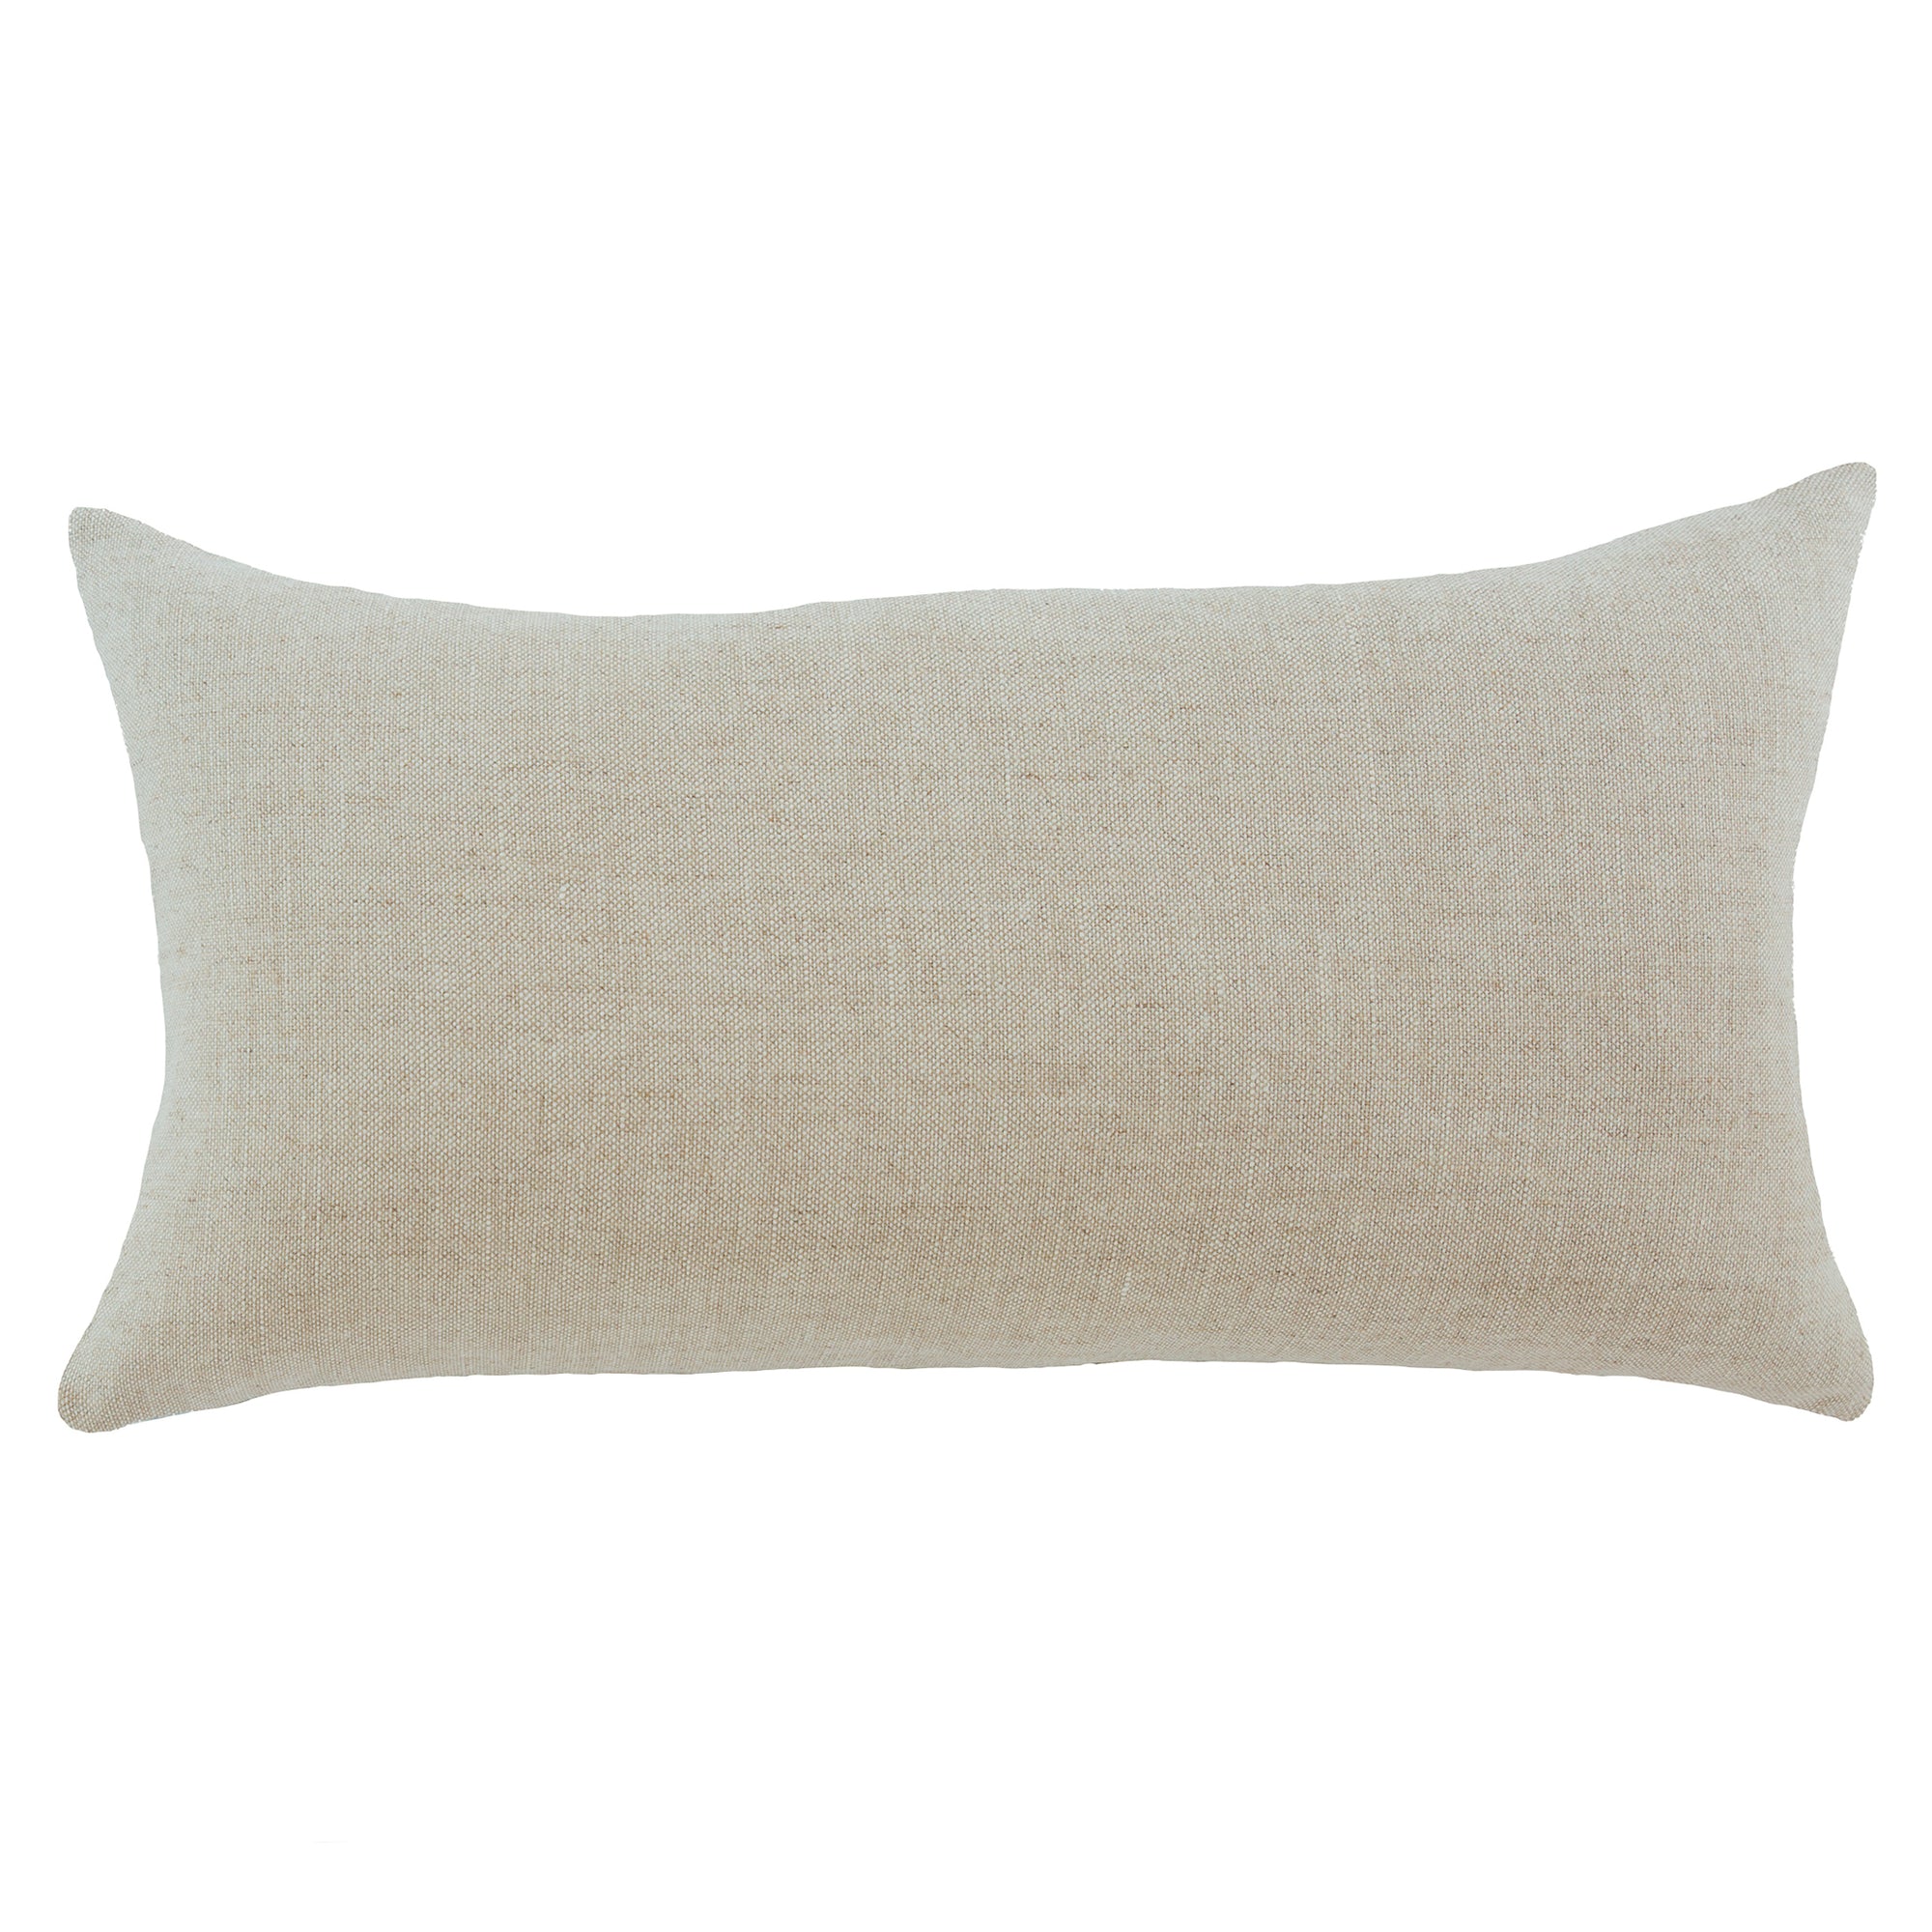 Timur Weave Sky Pillow Cover